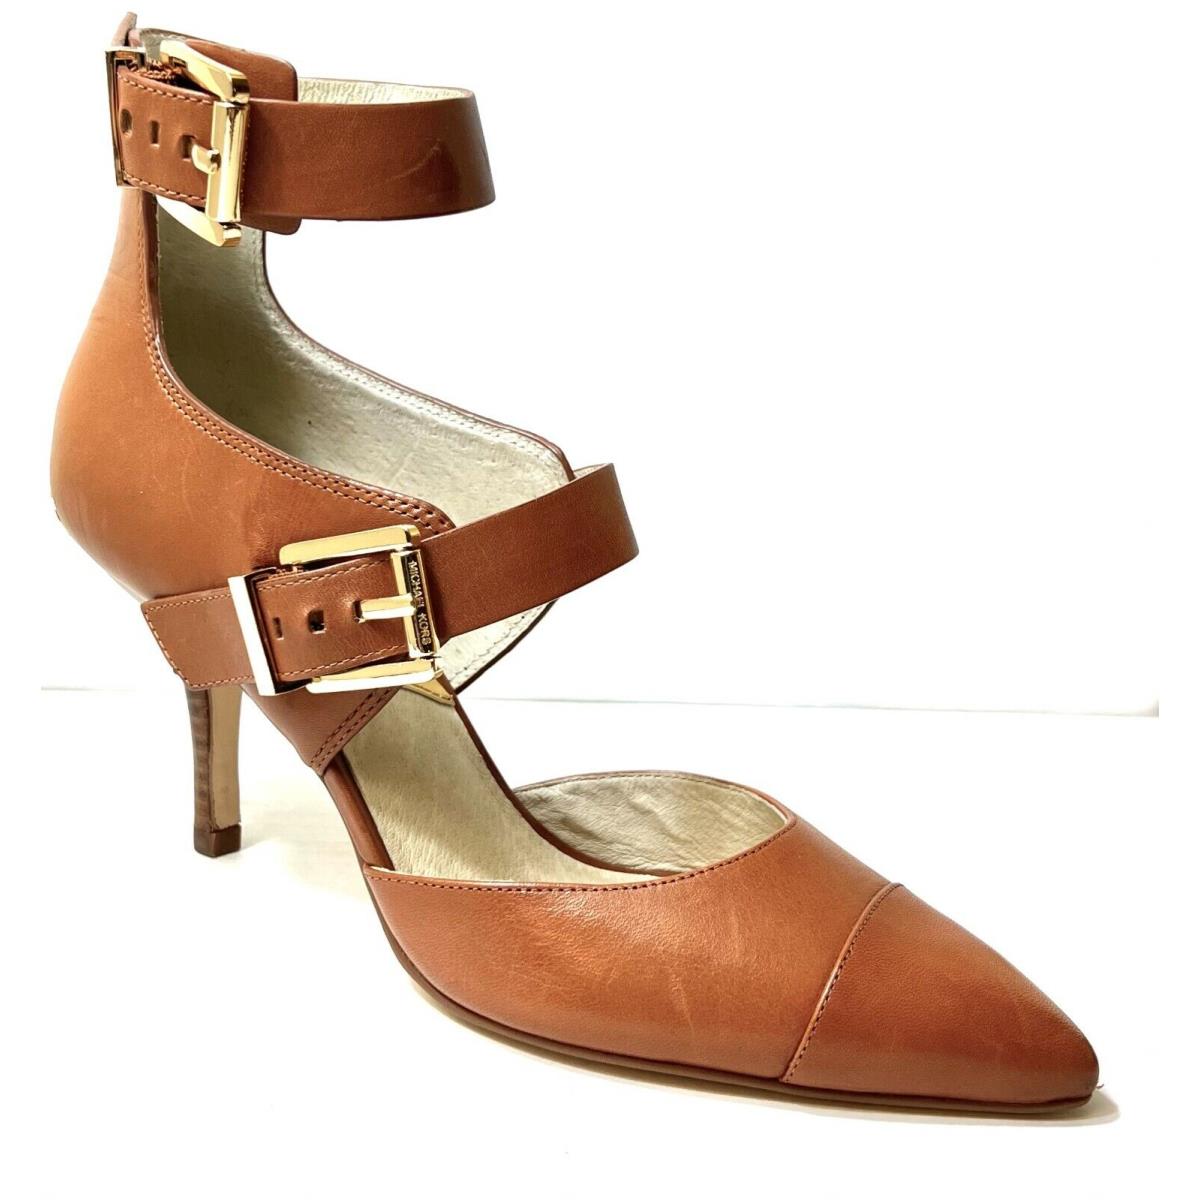 Kors Woman`s Adriana Mid Ankle-strap Sandal Luggage Size:7 M